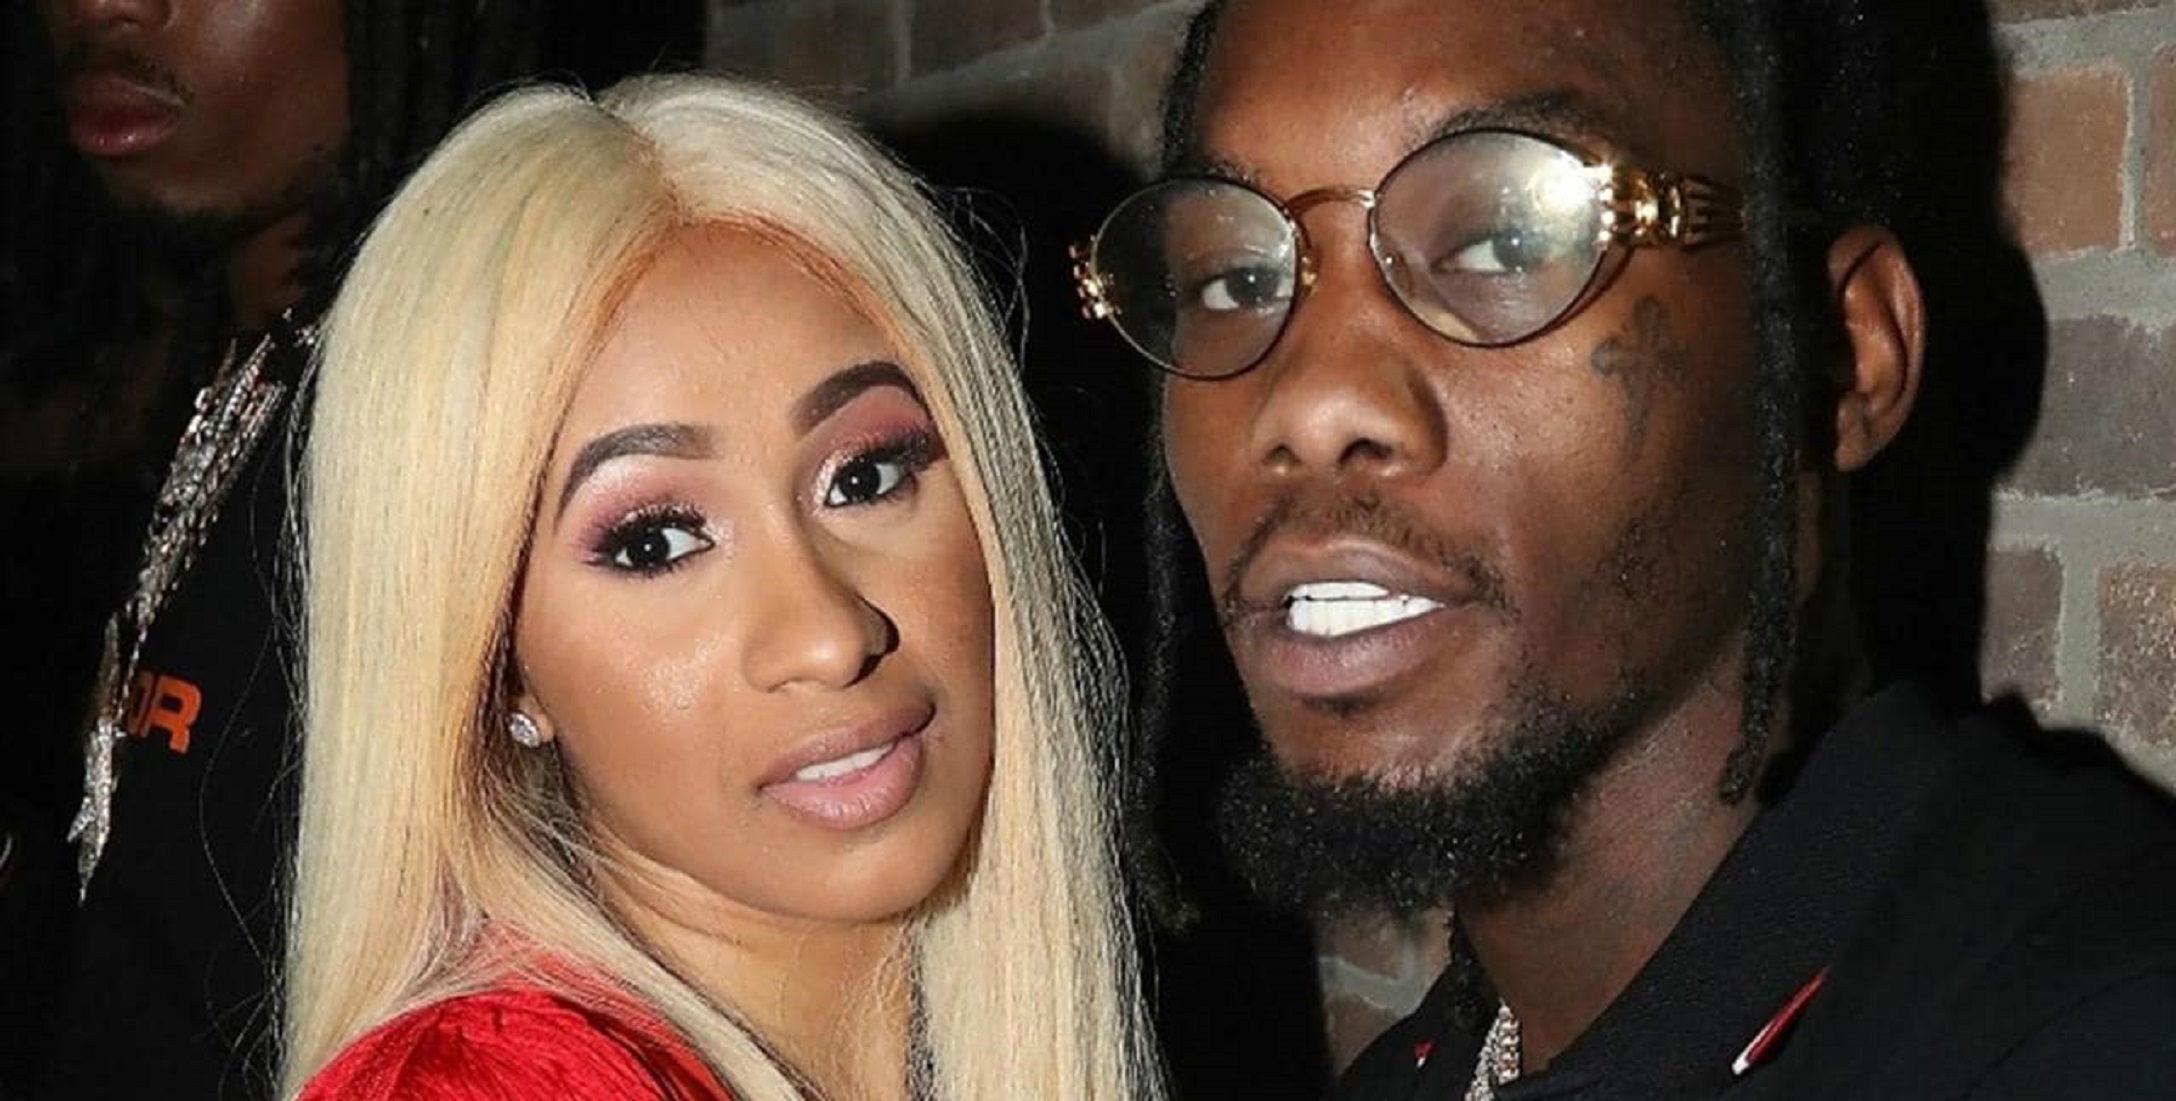 Cardi B Defends Offset After His ‘Miss u’ DM to Tekashi69’s GF, ‘His Account Was Hacked’